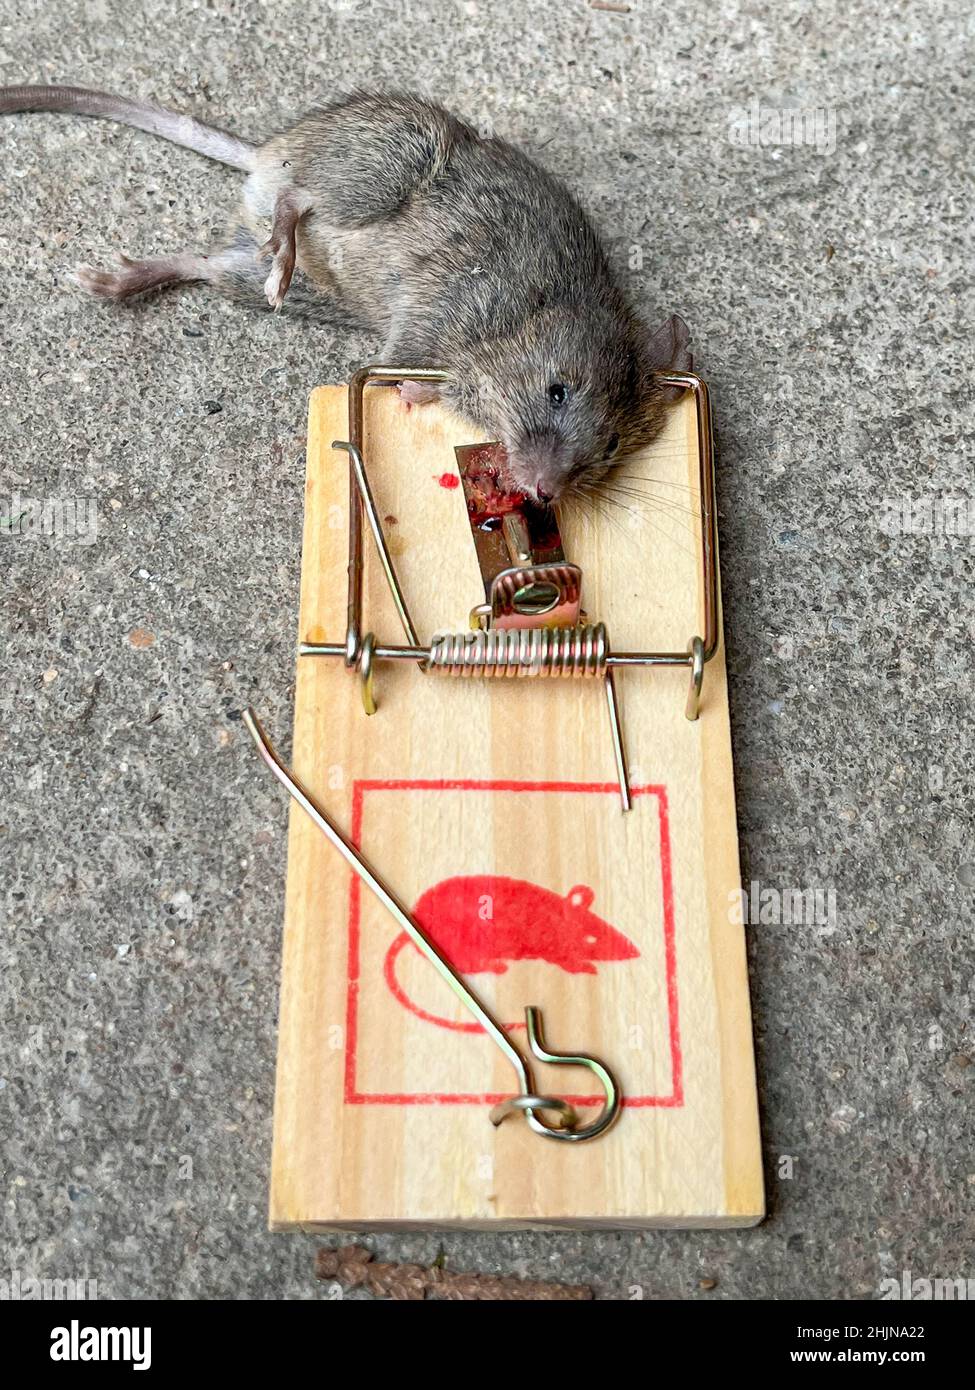 https://c8.alamy.com/comp/2HJNA22/leipzig-germany-30th-jan-2022-a-dead-mouse-lies-in-a-mousetrap-in-a-garage-the-rodent-was-lured-into-the-beating-trap-with-a-piece-of-chocolate-credit-jan-woitasdpa-zentralbildzbdpaalamy-live-news-2HJNA22.jpg